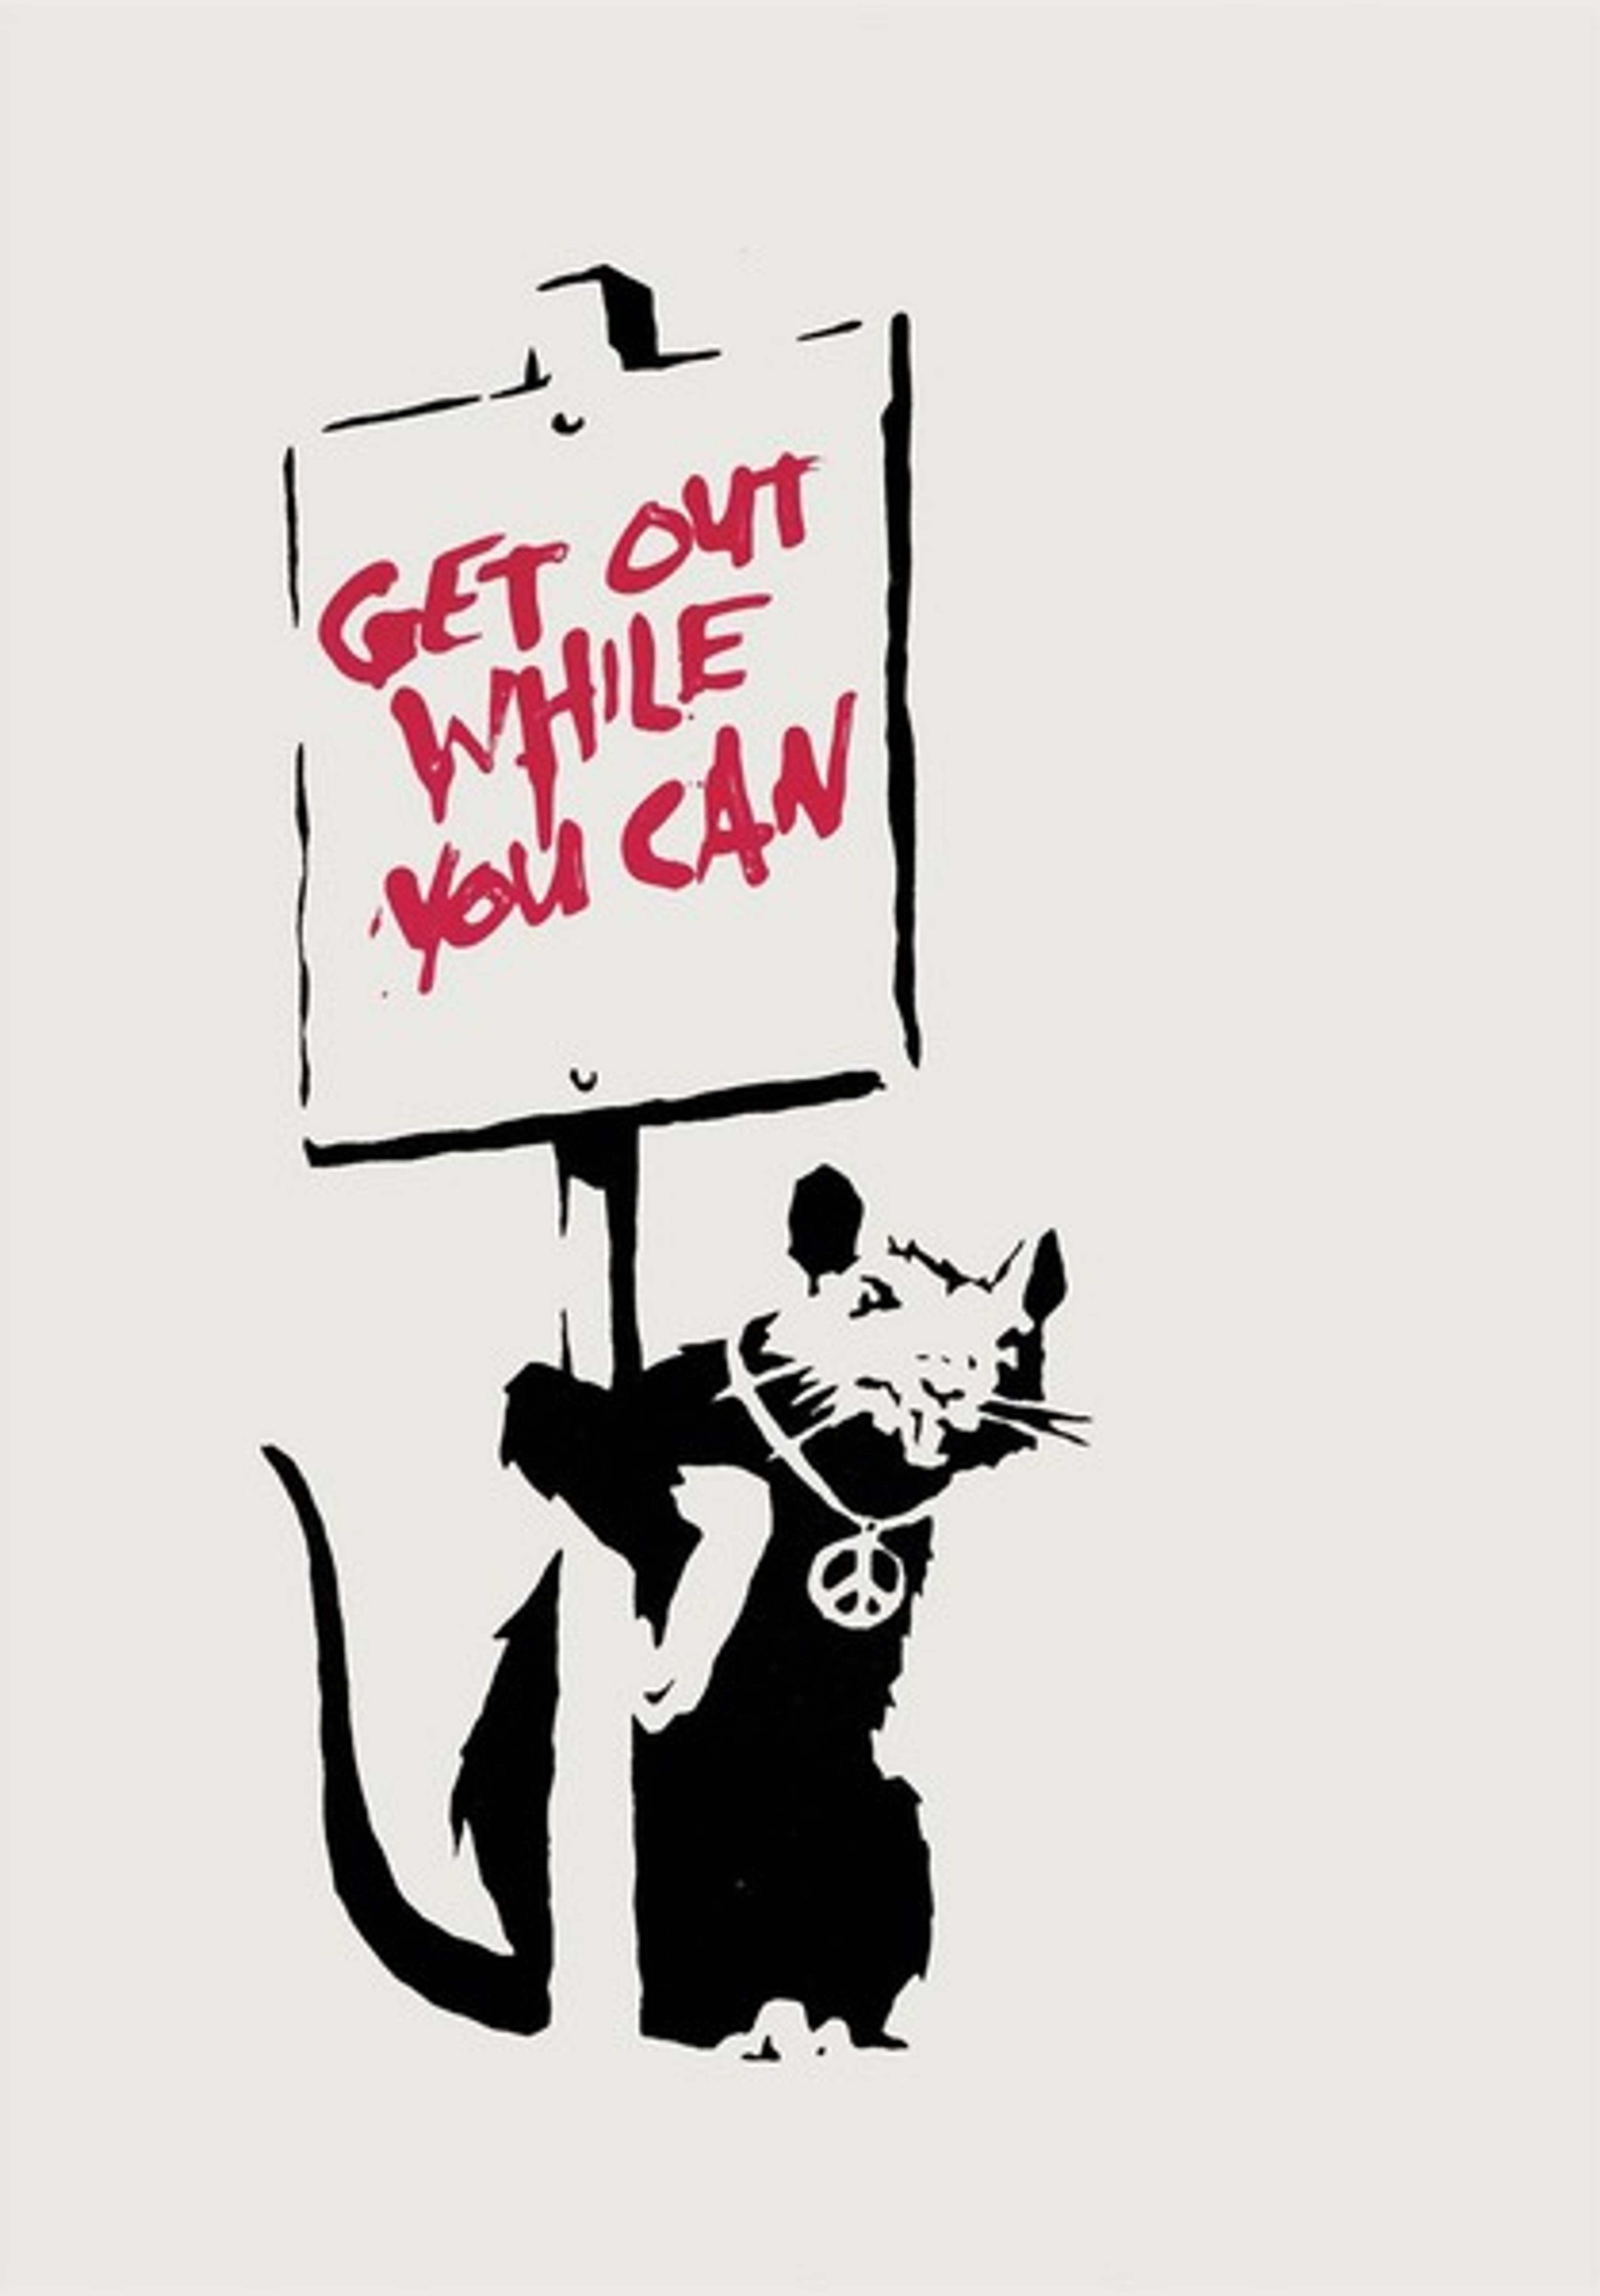 Get Out While You Can (Placard Rat)